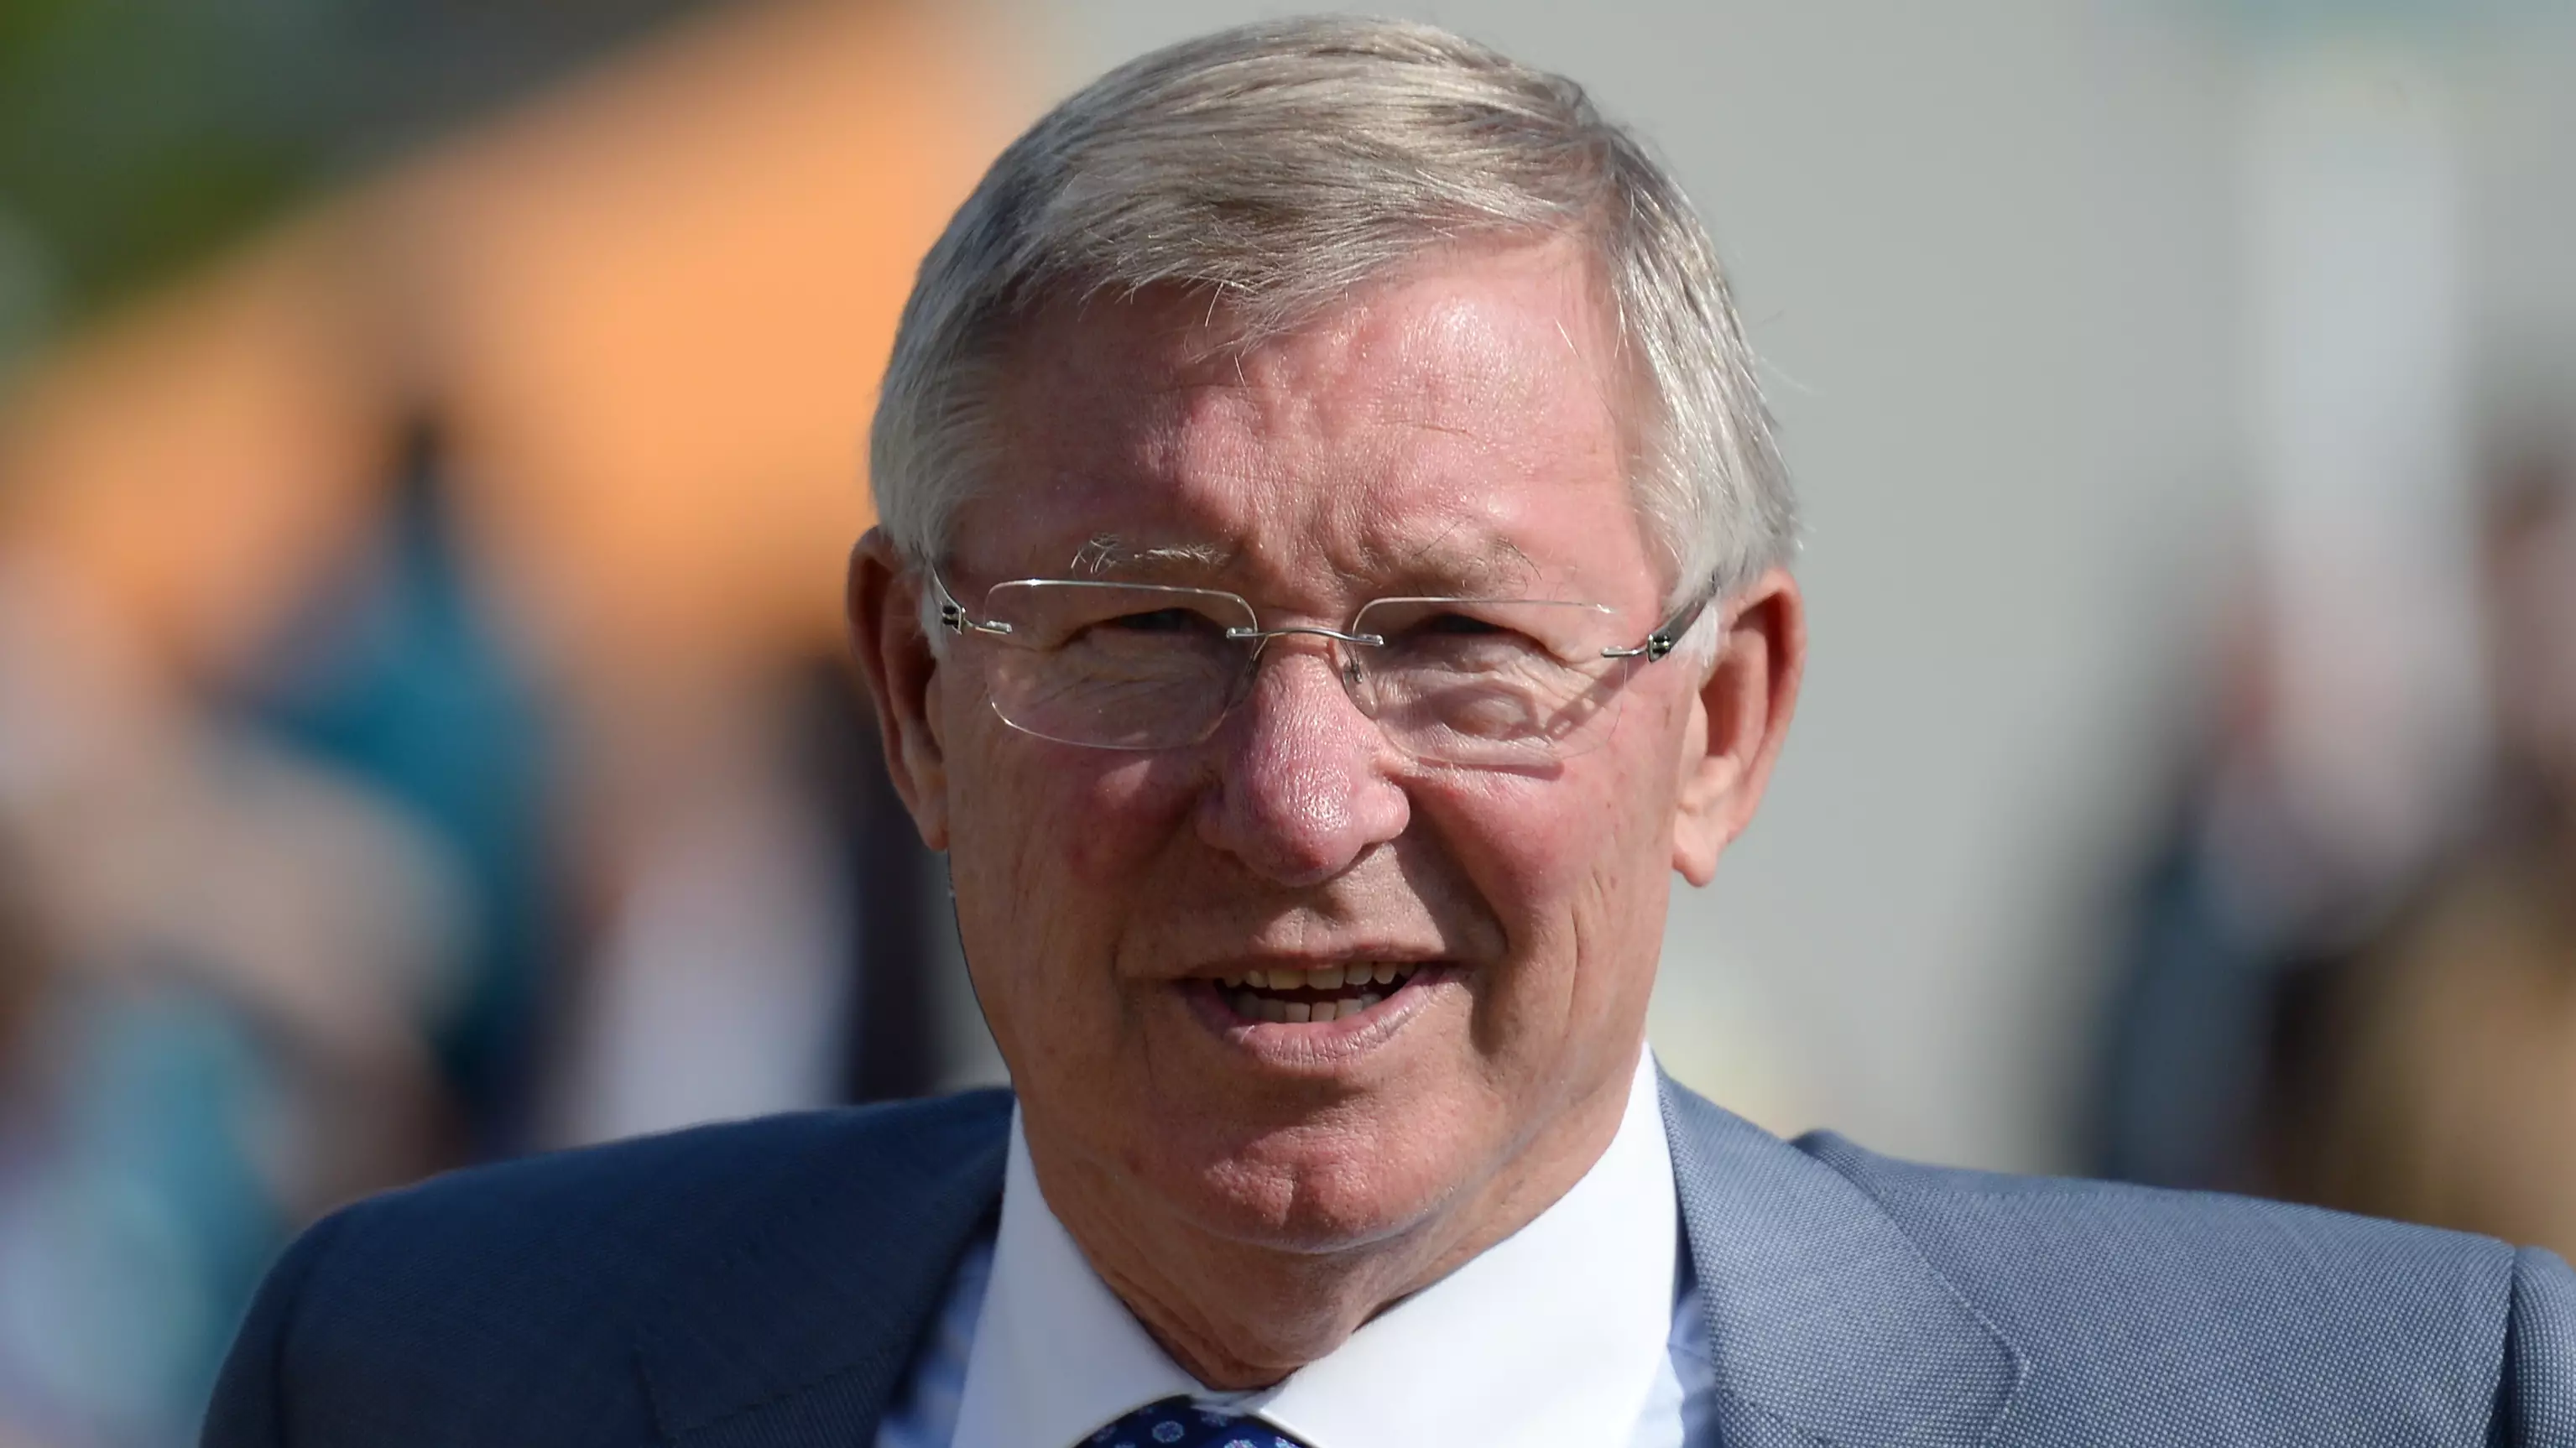 Sir Alex Ferguson 'Agreed' To Manage A Premier League Rival Before He Took United Job